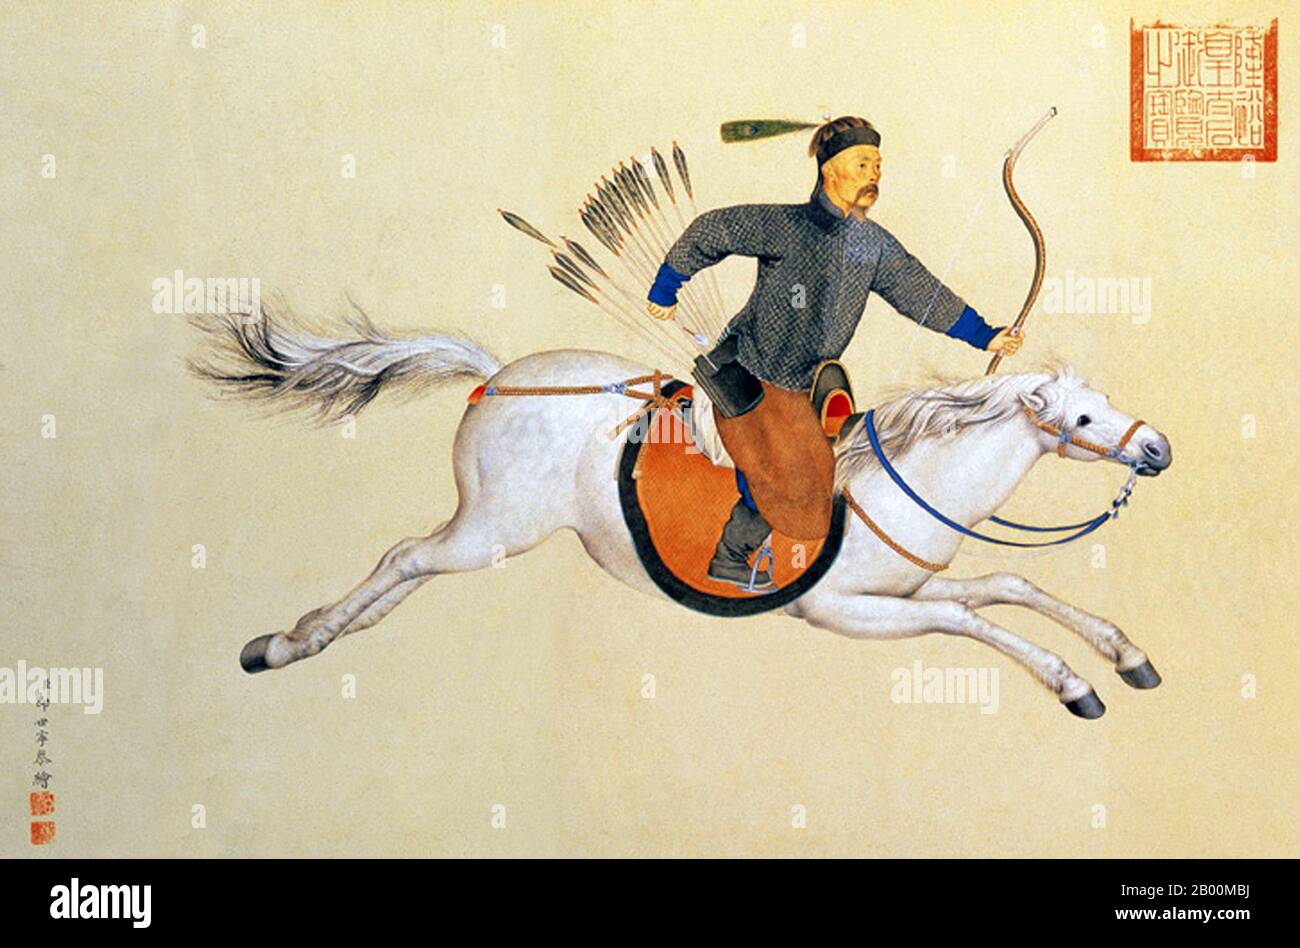 China: Manchu general Machang riding at full gallop on white horse with bow and arrows, reign of Emperor Qianlong, c. 1765, by Giuseppe Castiglione (1688-1766).  Ferghana horses were one of China's earliest major imports, originating in an area in Central Asia. Dayuan, north of Bactria, was a nation centered in the Ferghana Valley of present-day Central Asia, and even as early as the Han Dynasty, China projected its military power to that area. The imperial regime required Ferghana horses and imported such great numbers of them that the rulers of Ferghana closed their borders to such trade. Stock Photo